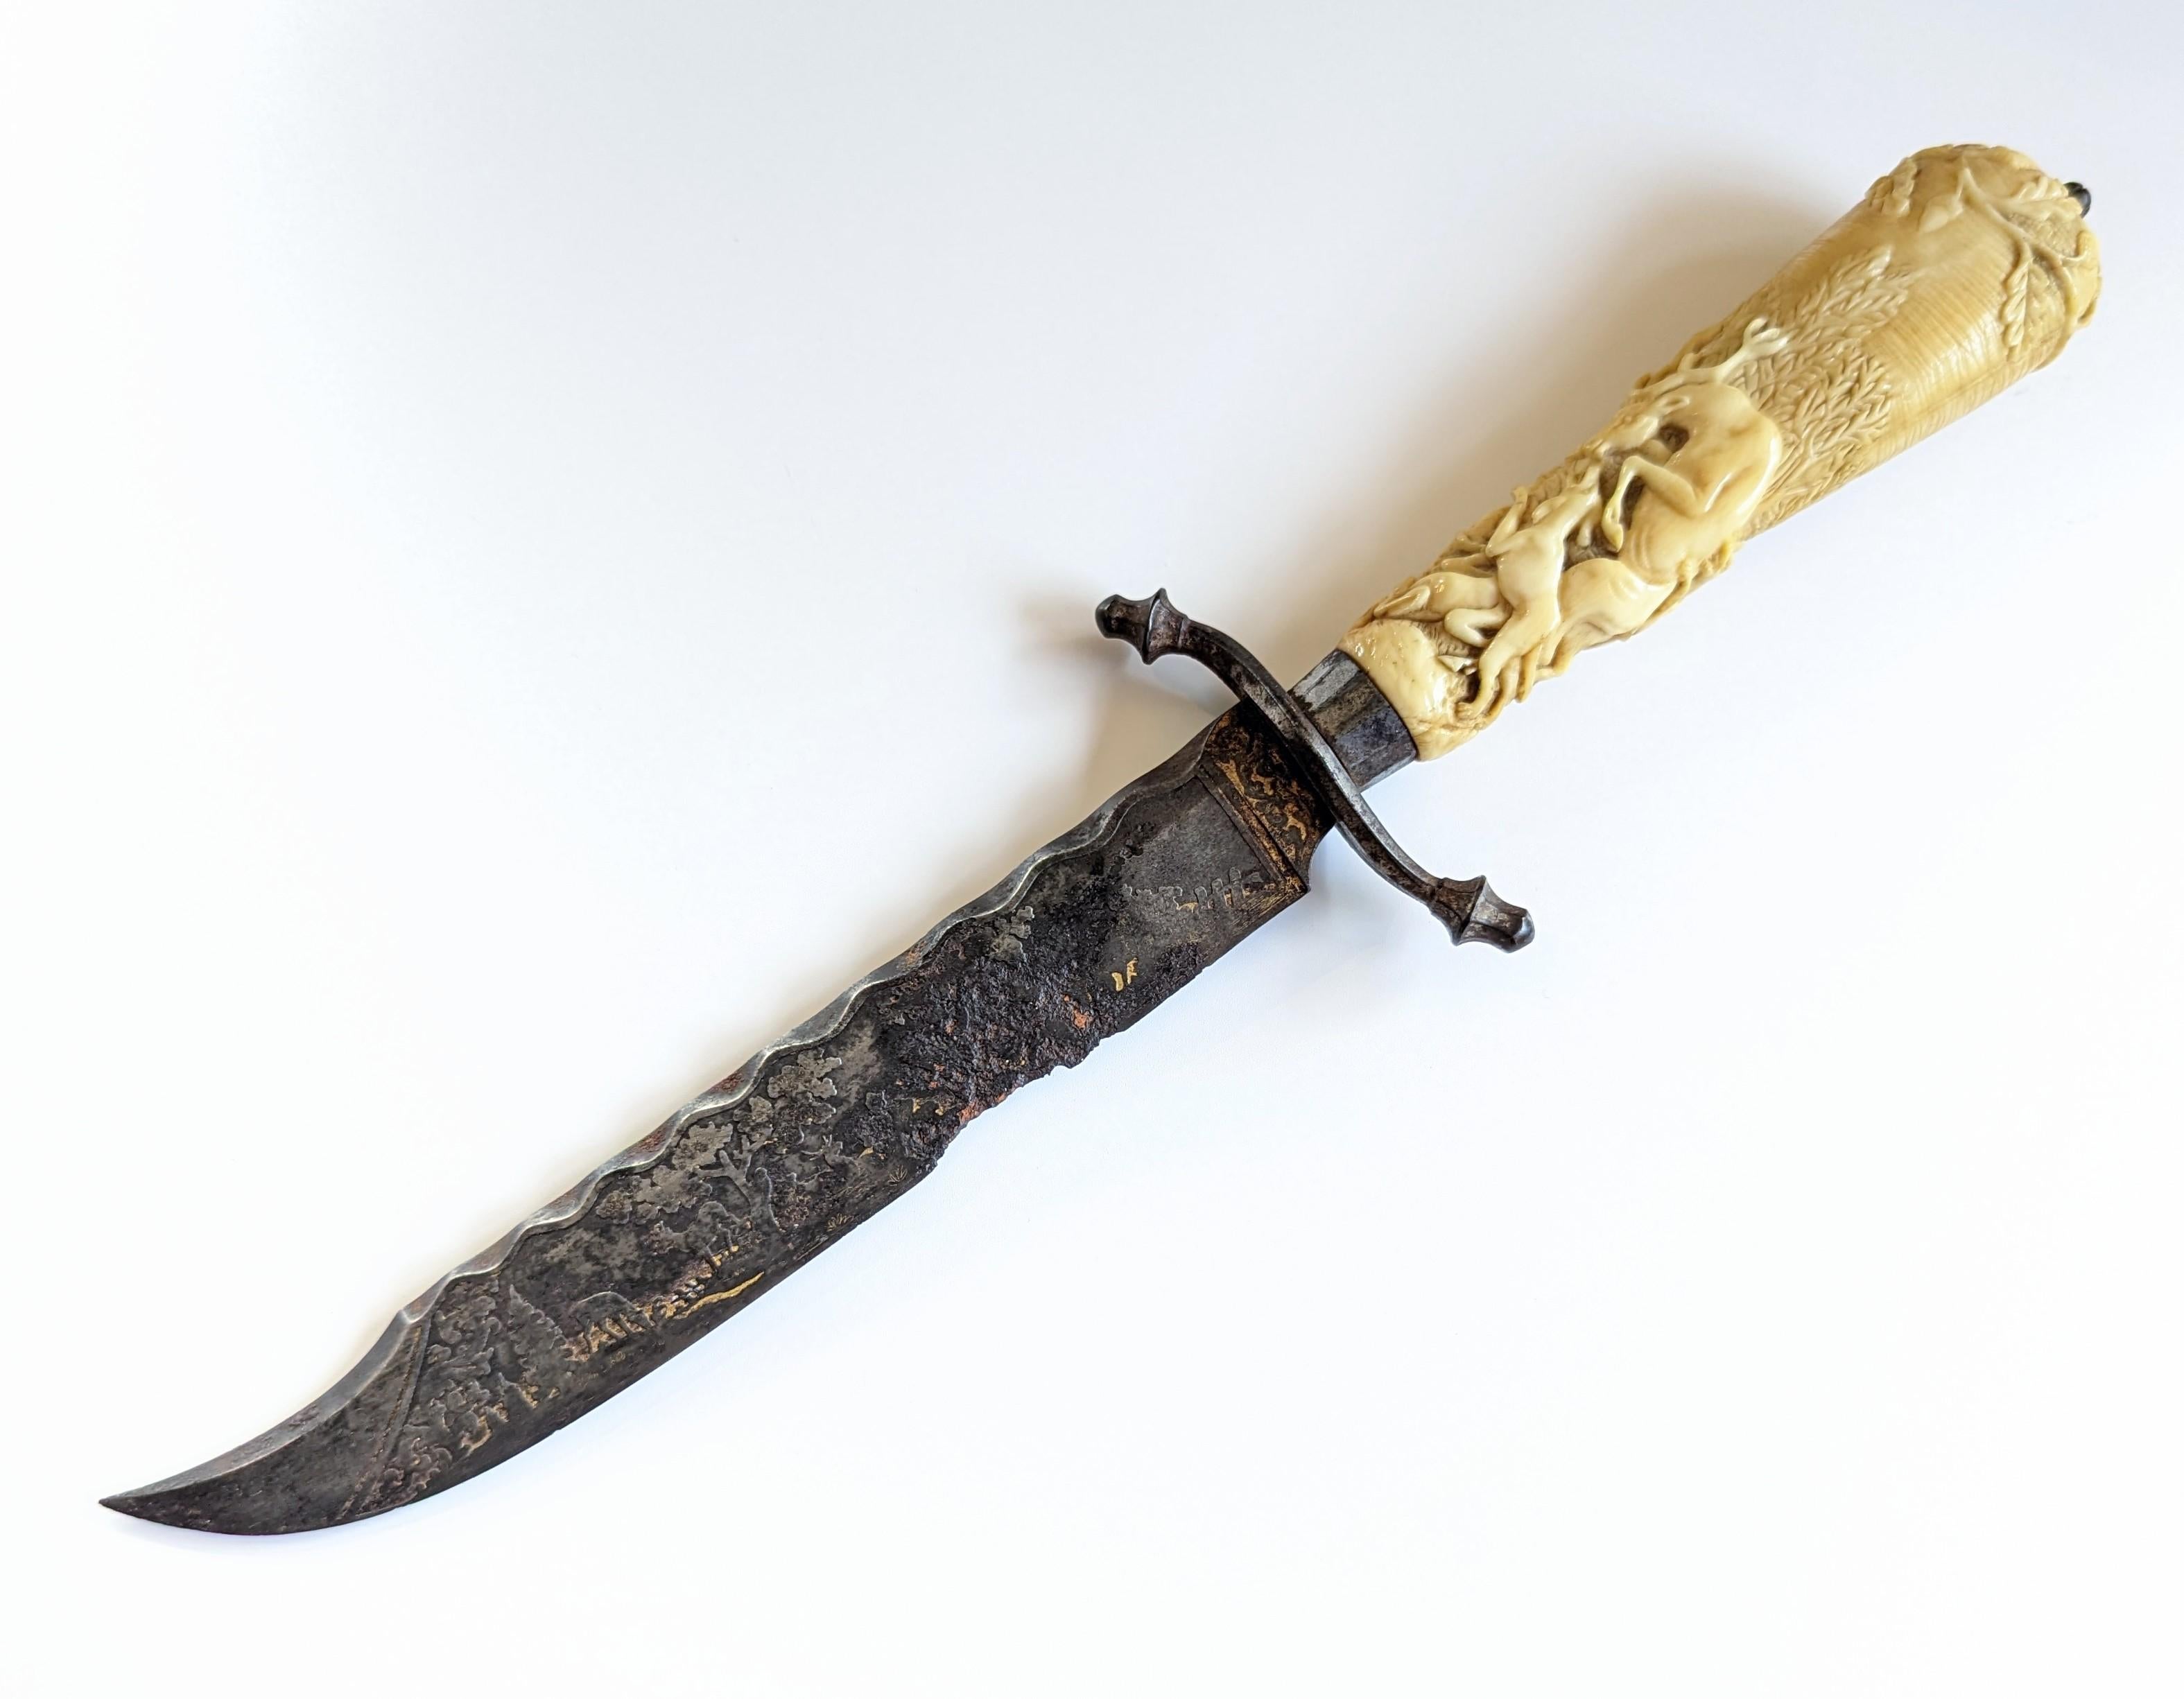 Exquisite antique hand carved bone knife with intricate hunting scene design. European made, possibly south German circa 1700s to 1800s, though we are not completely certain. The blade has hints of gilding along with an etched design on both sides.